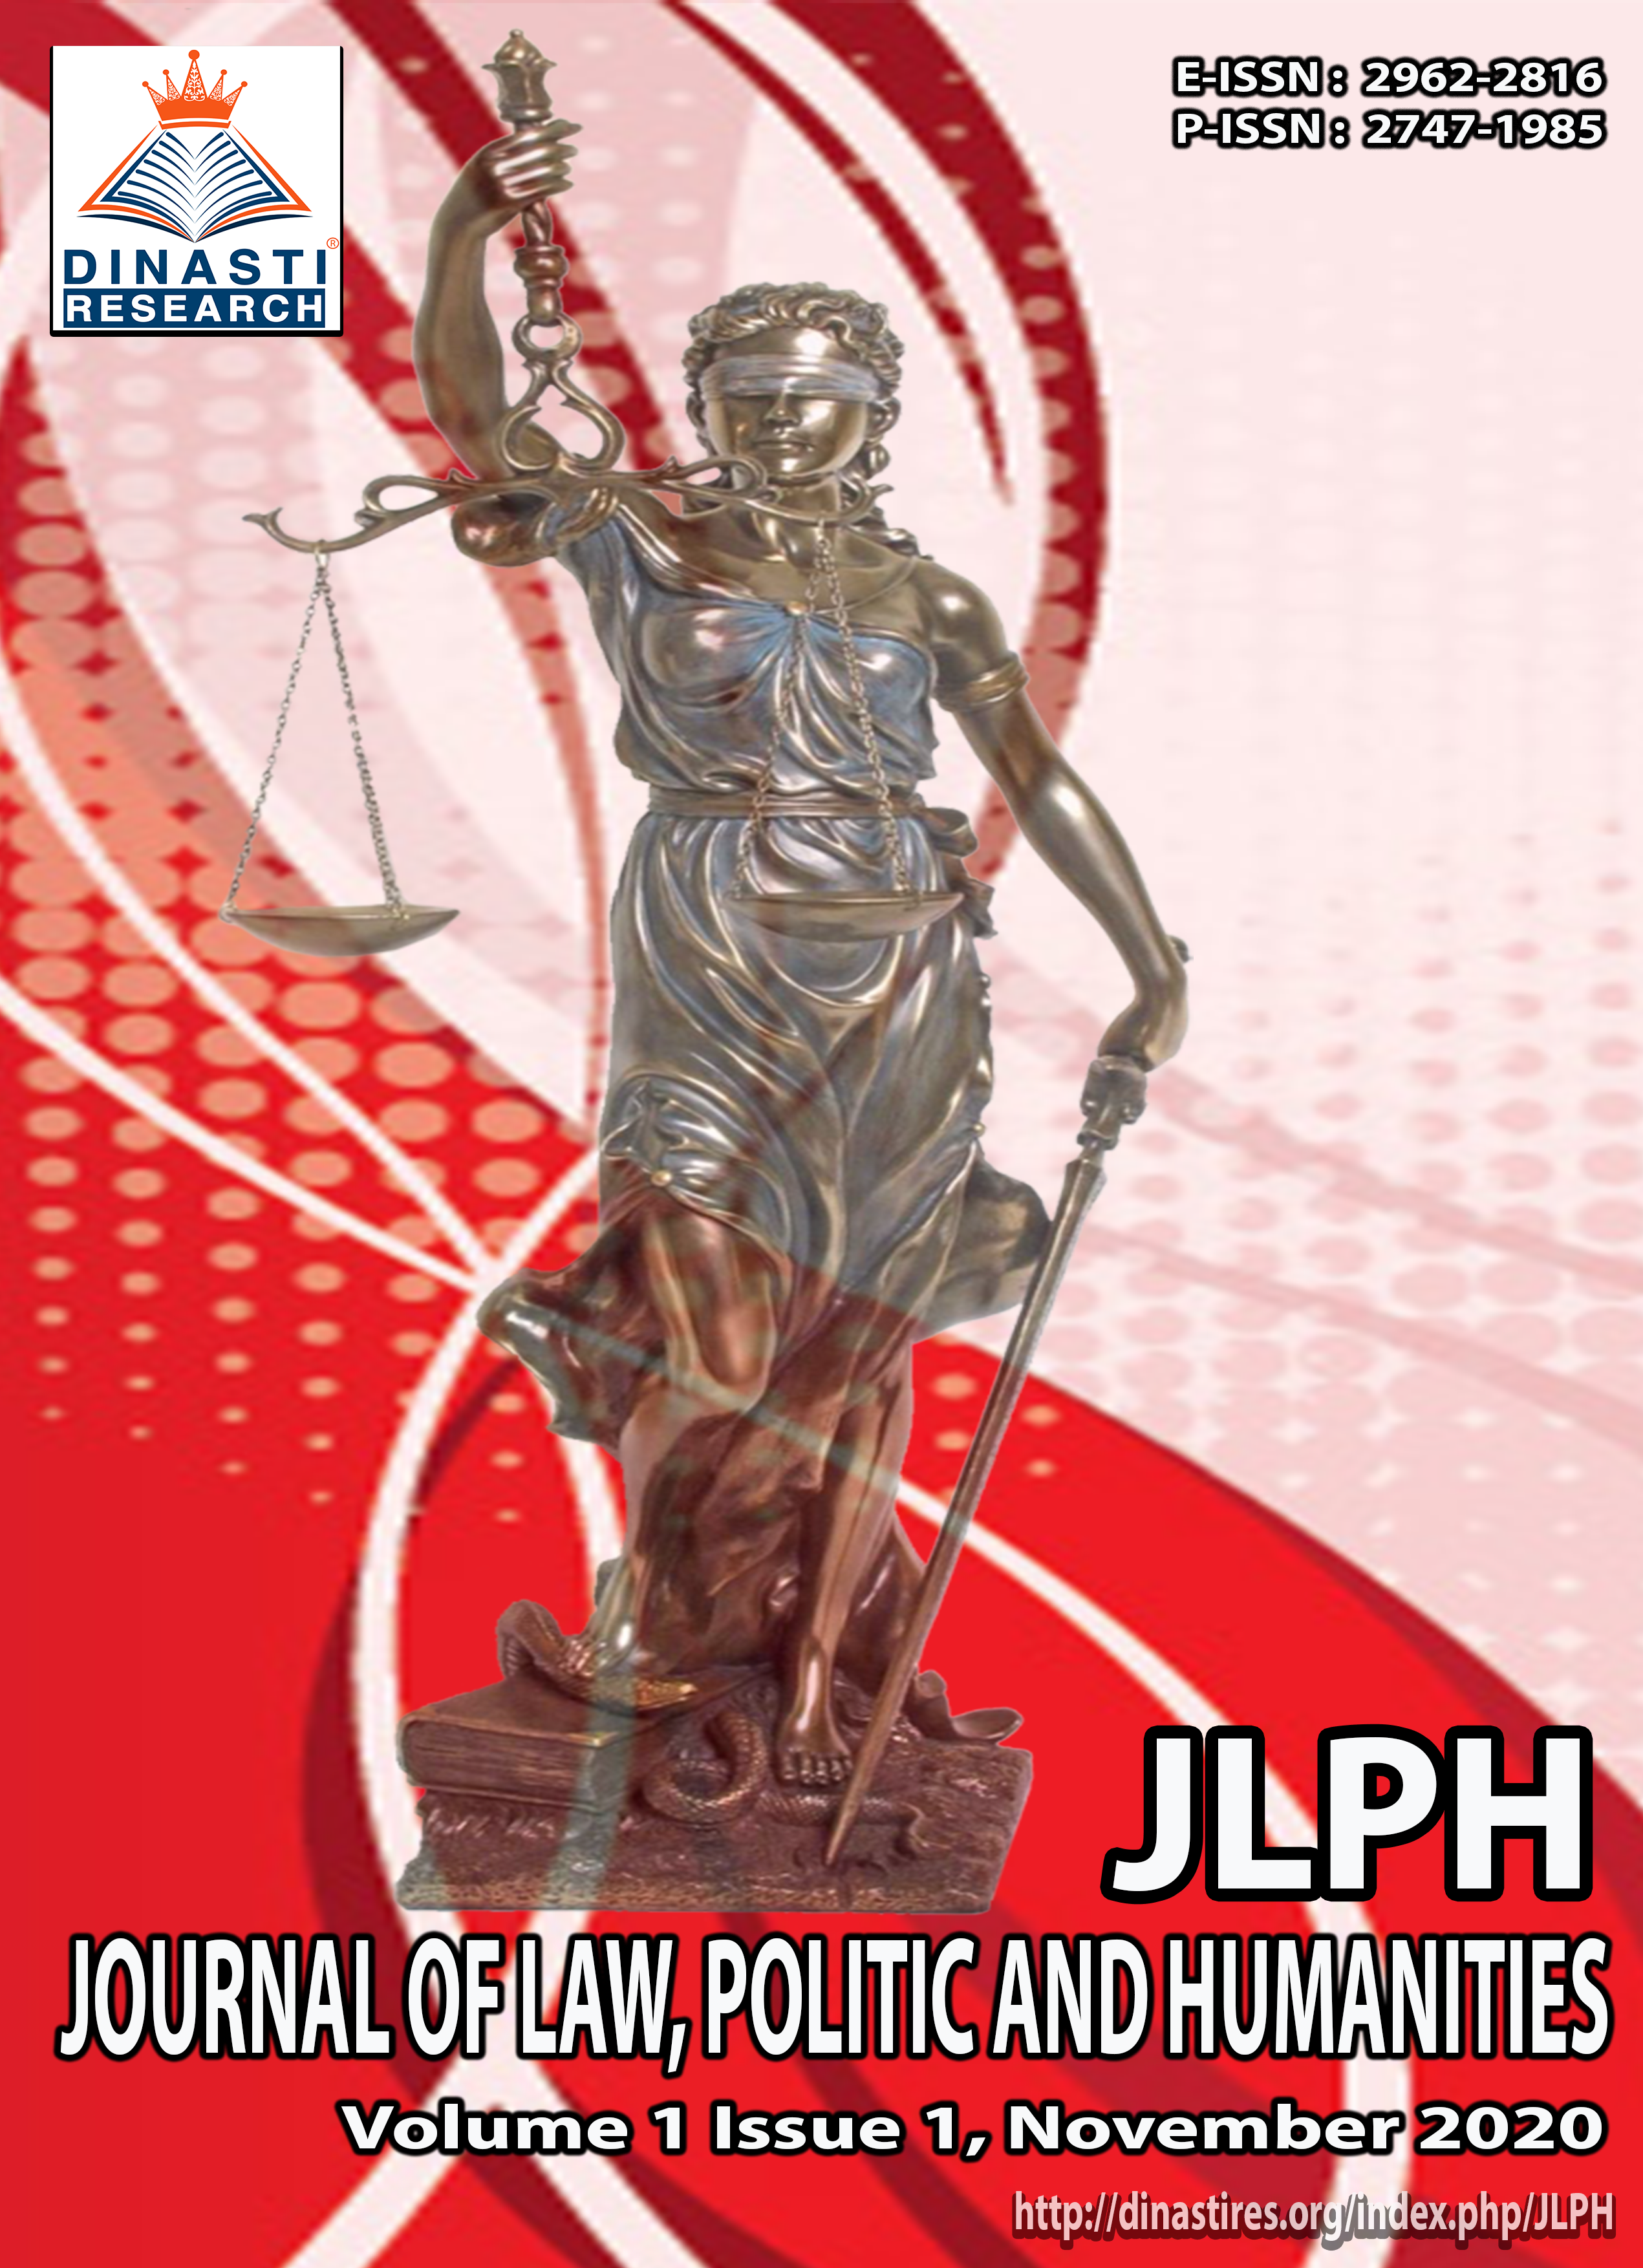 					View Vol. 1 No. 1 (2020): (JLPH) Journal of Law, Politic and Humanities (November 2020)
				